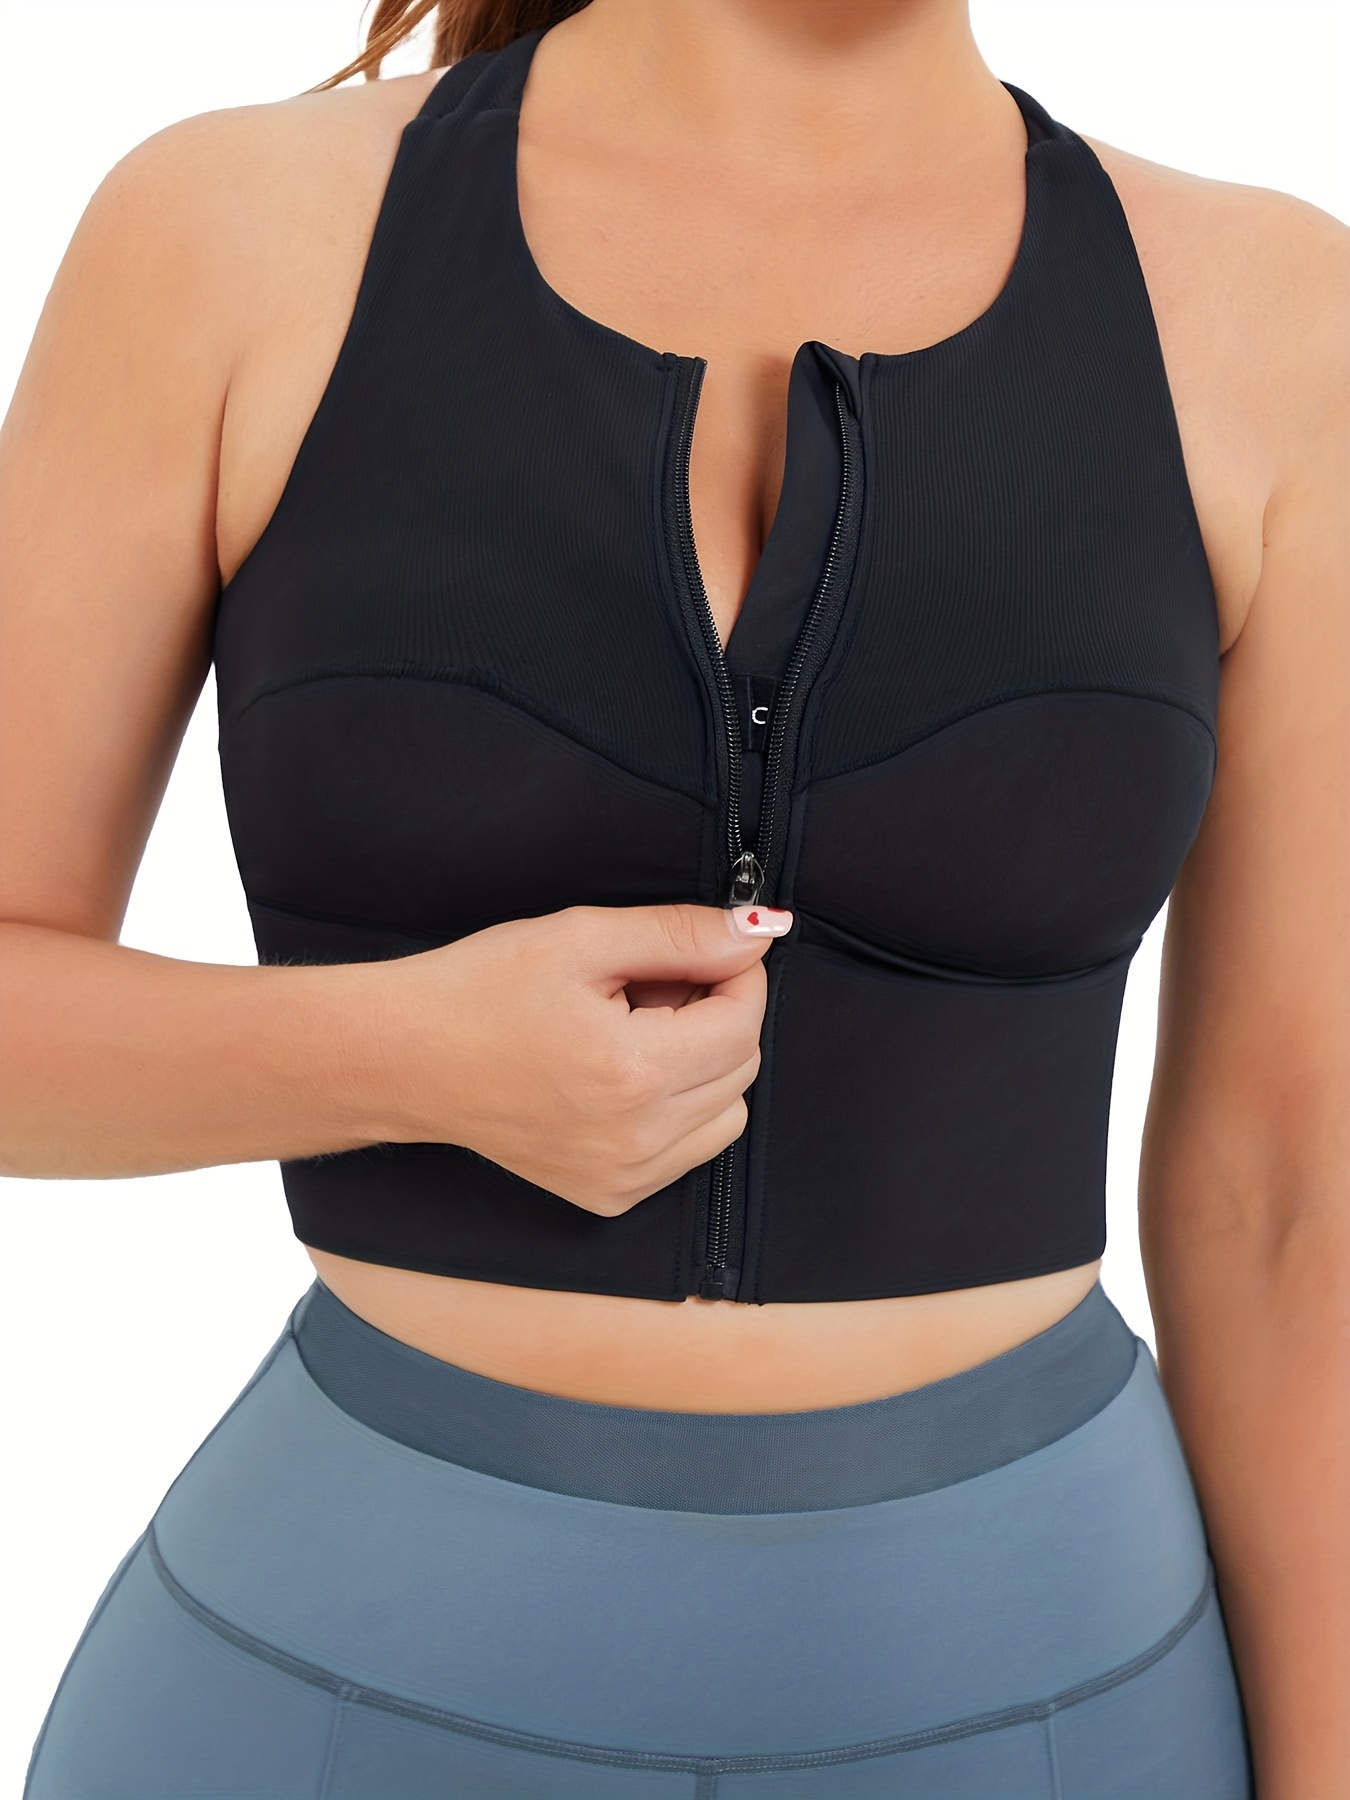 Tomboyx Sports Bra, Medium Impact Support, Wirefree Athletic